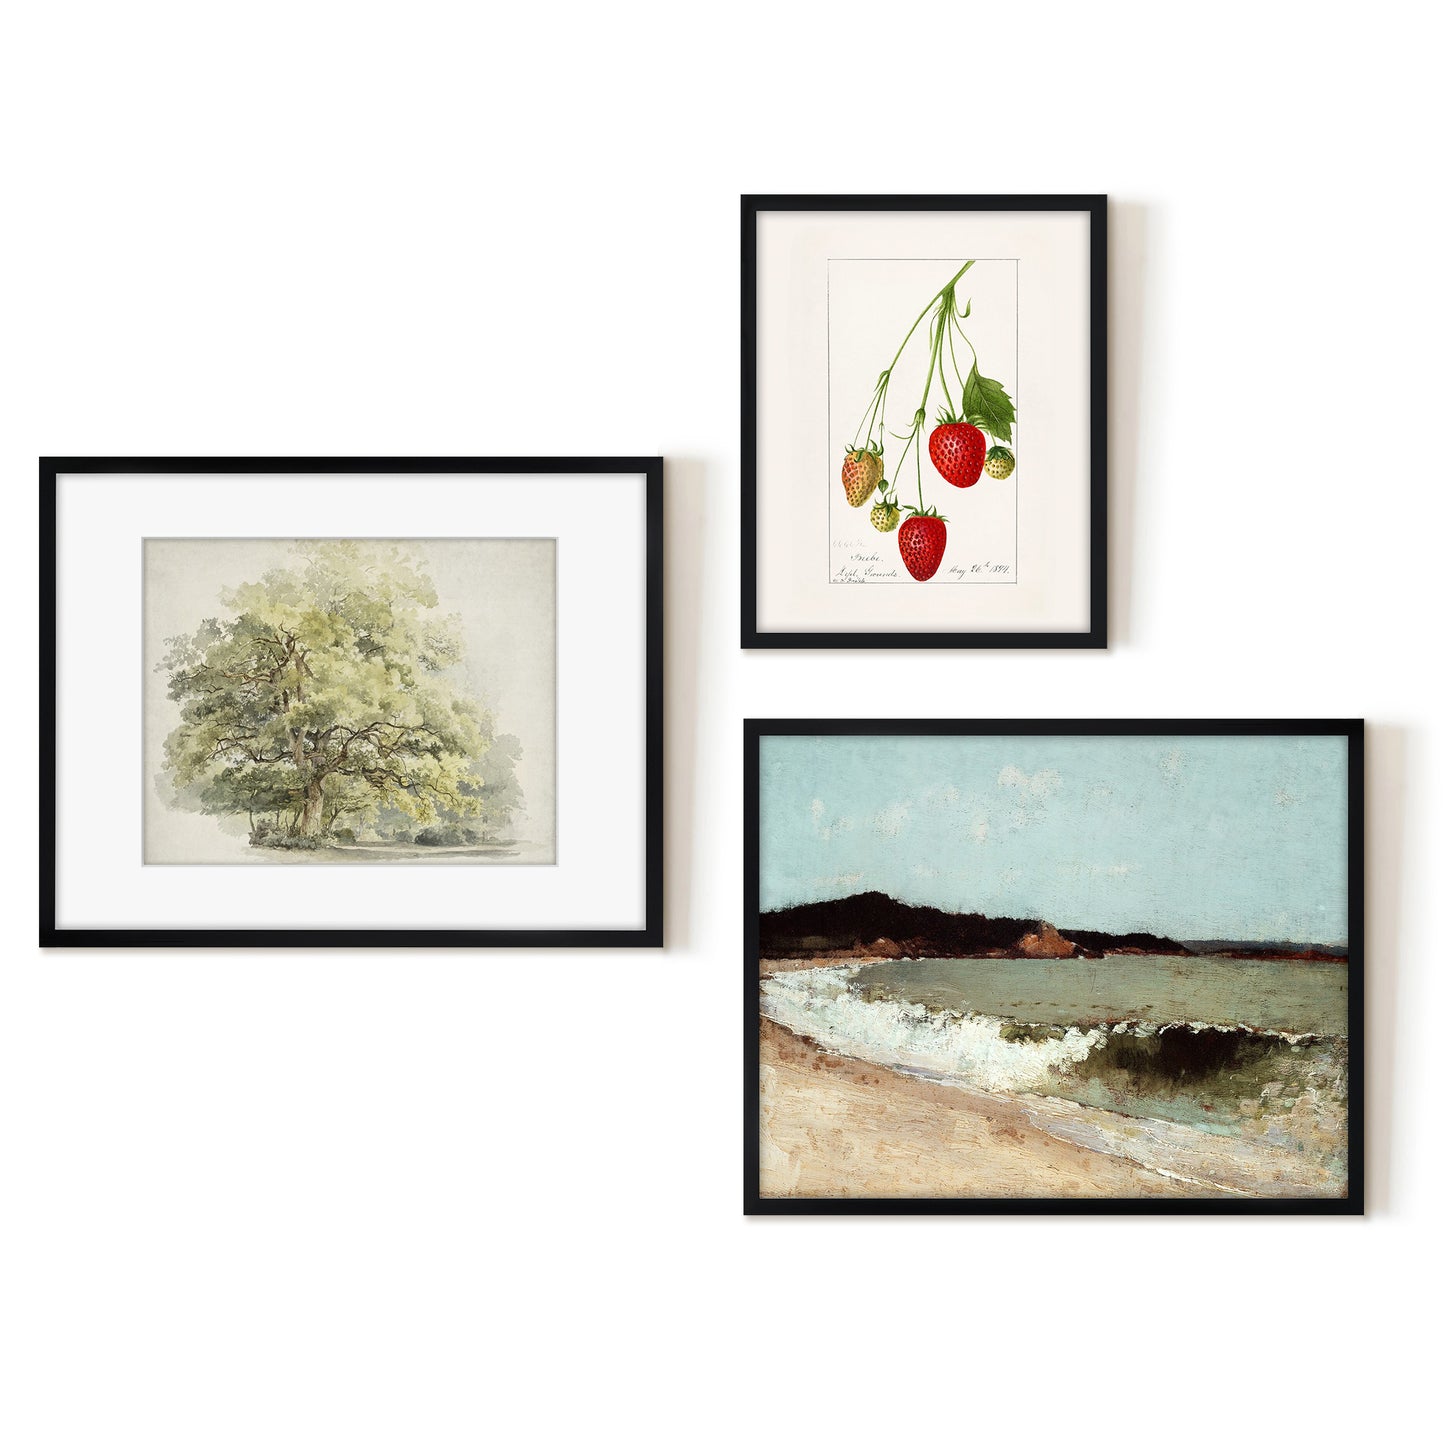 3 Piece Vintage Gallery Wall Art Set - Nature's Delicacy Art by Wall + Wonder